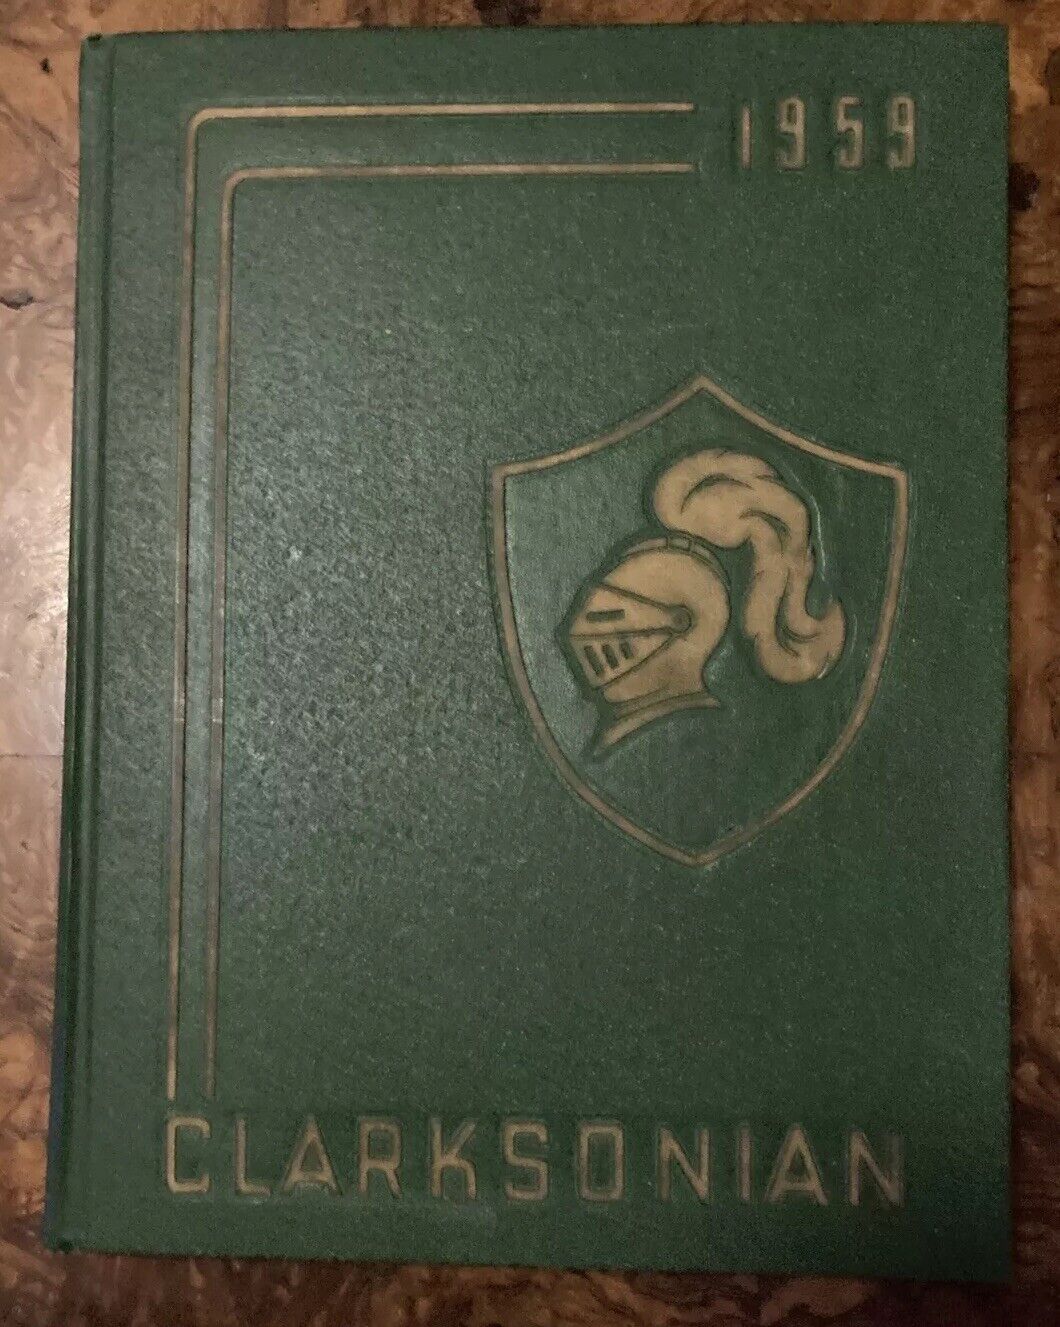 Clarkson College Of Technology Yearbook 1959 Potsdam New York The Clarksonian